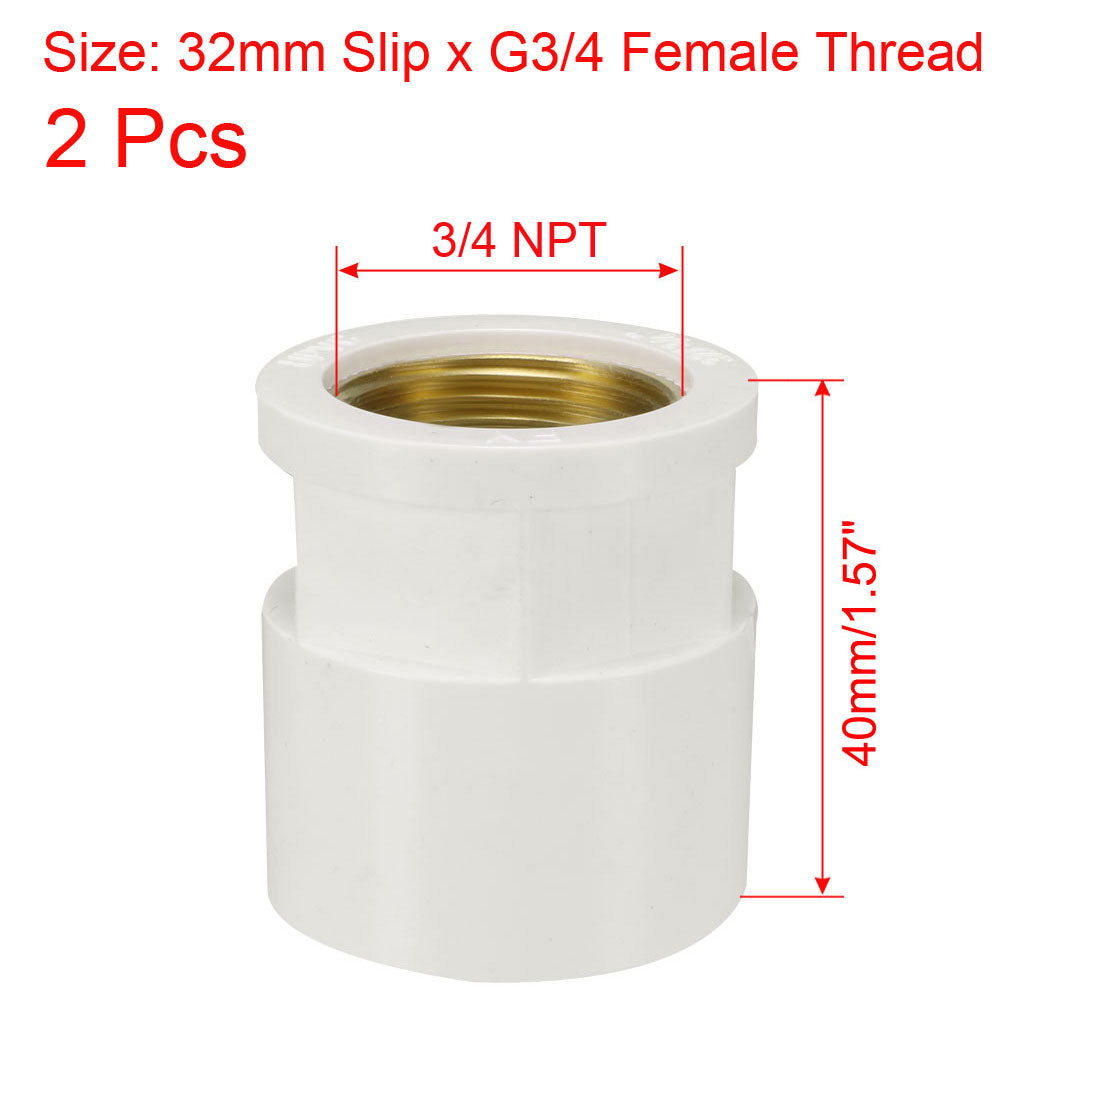 uxcell Uxcell 32mm Slip x 3/4 NPT Female Brass Thread PVC Pipe Fitting Adapter 2 Pcs